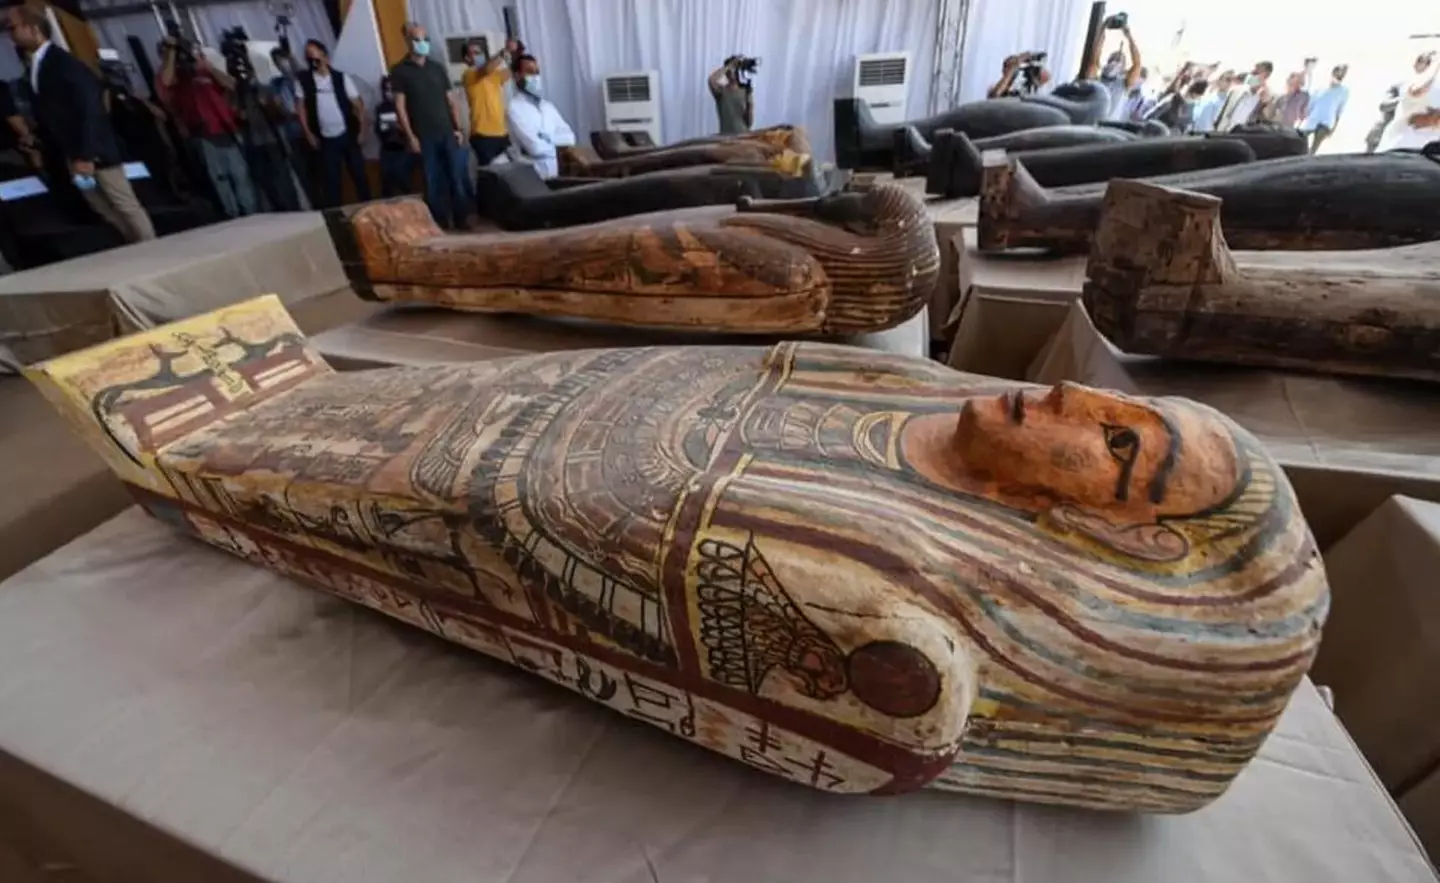 The coffin is one of 59 found.